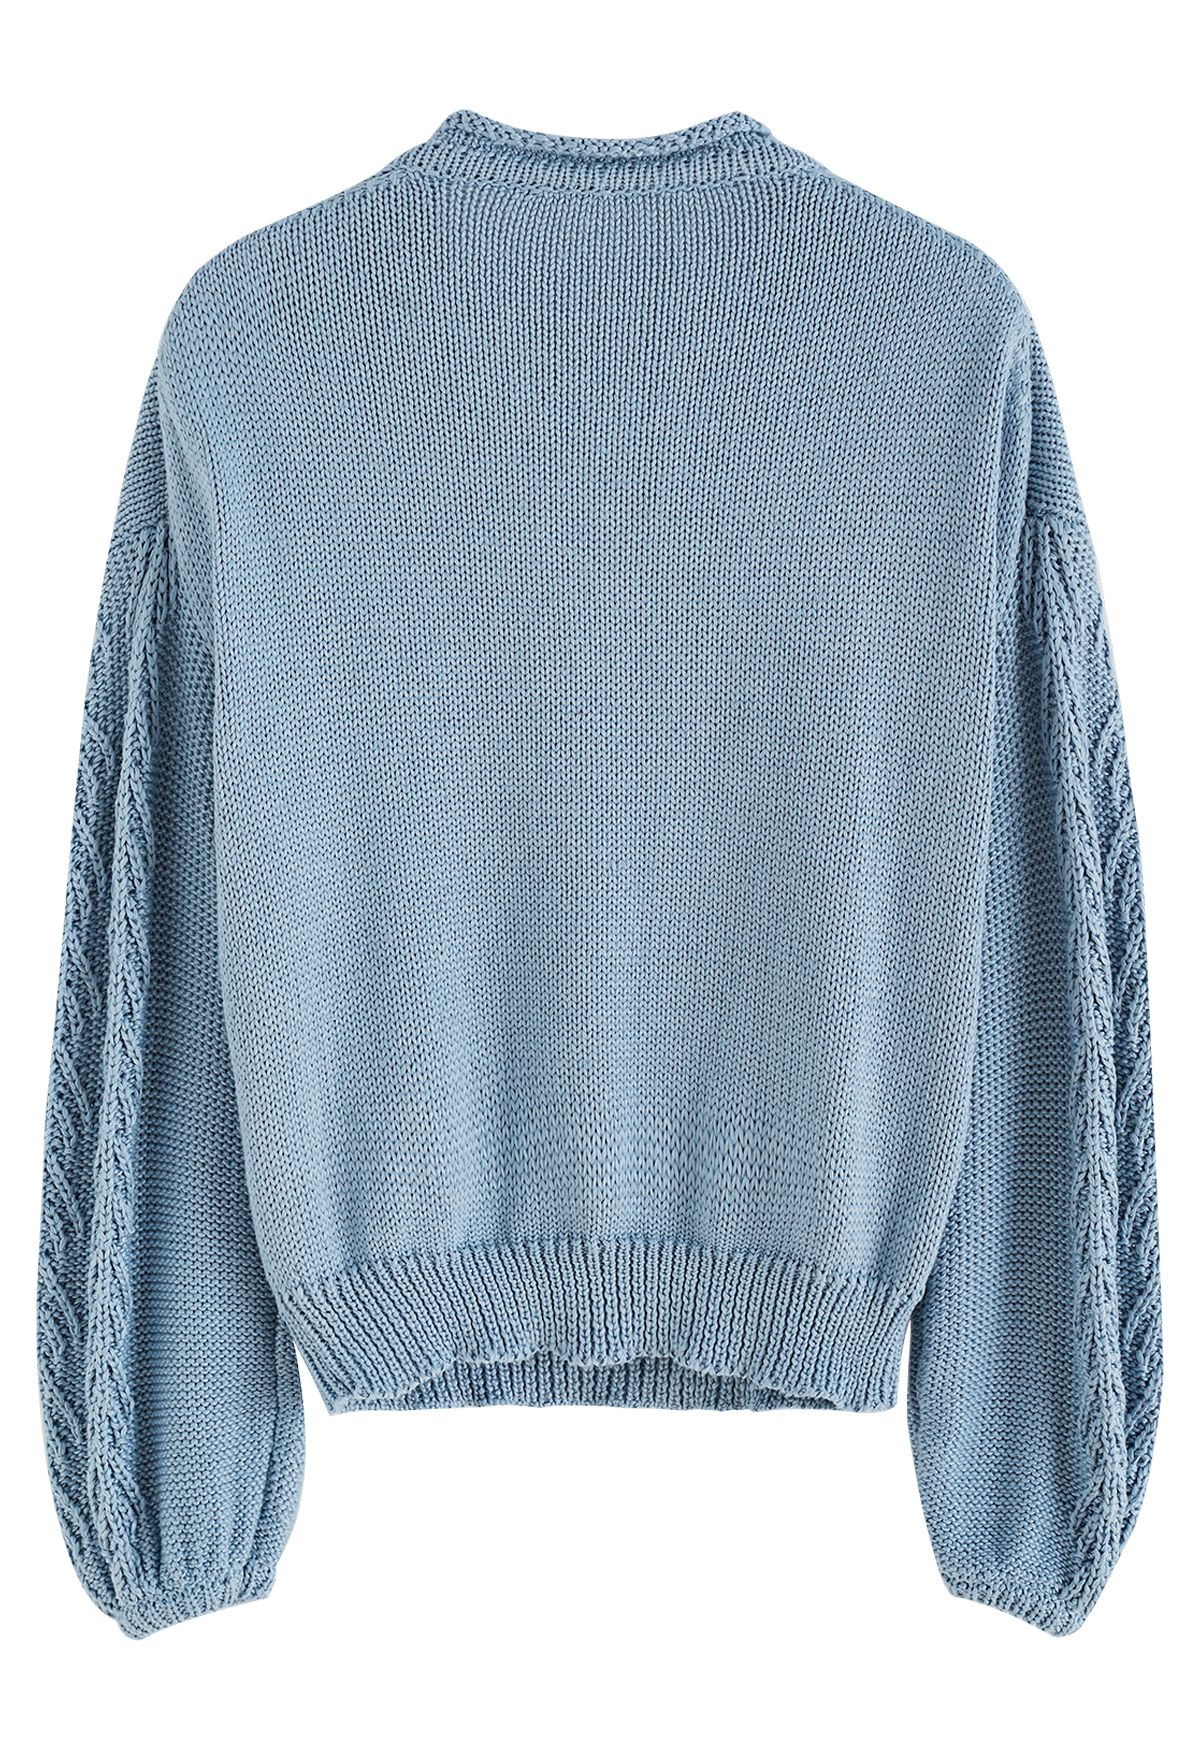 Blooming Passion Floral Stitch V-Neck Knit Sweater in Blue